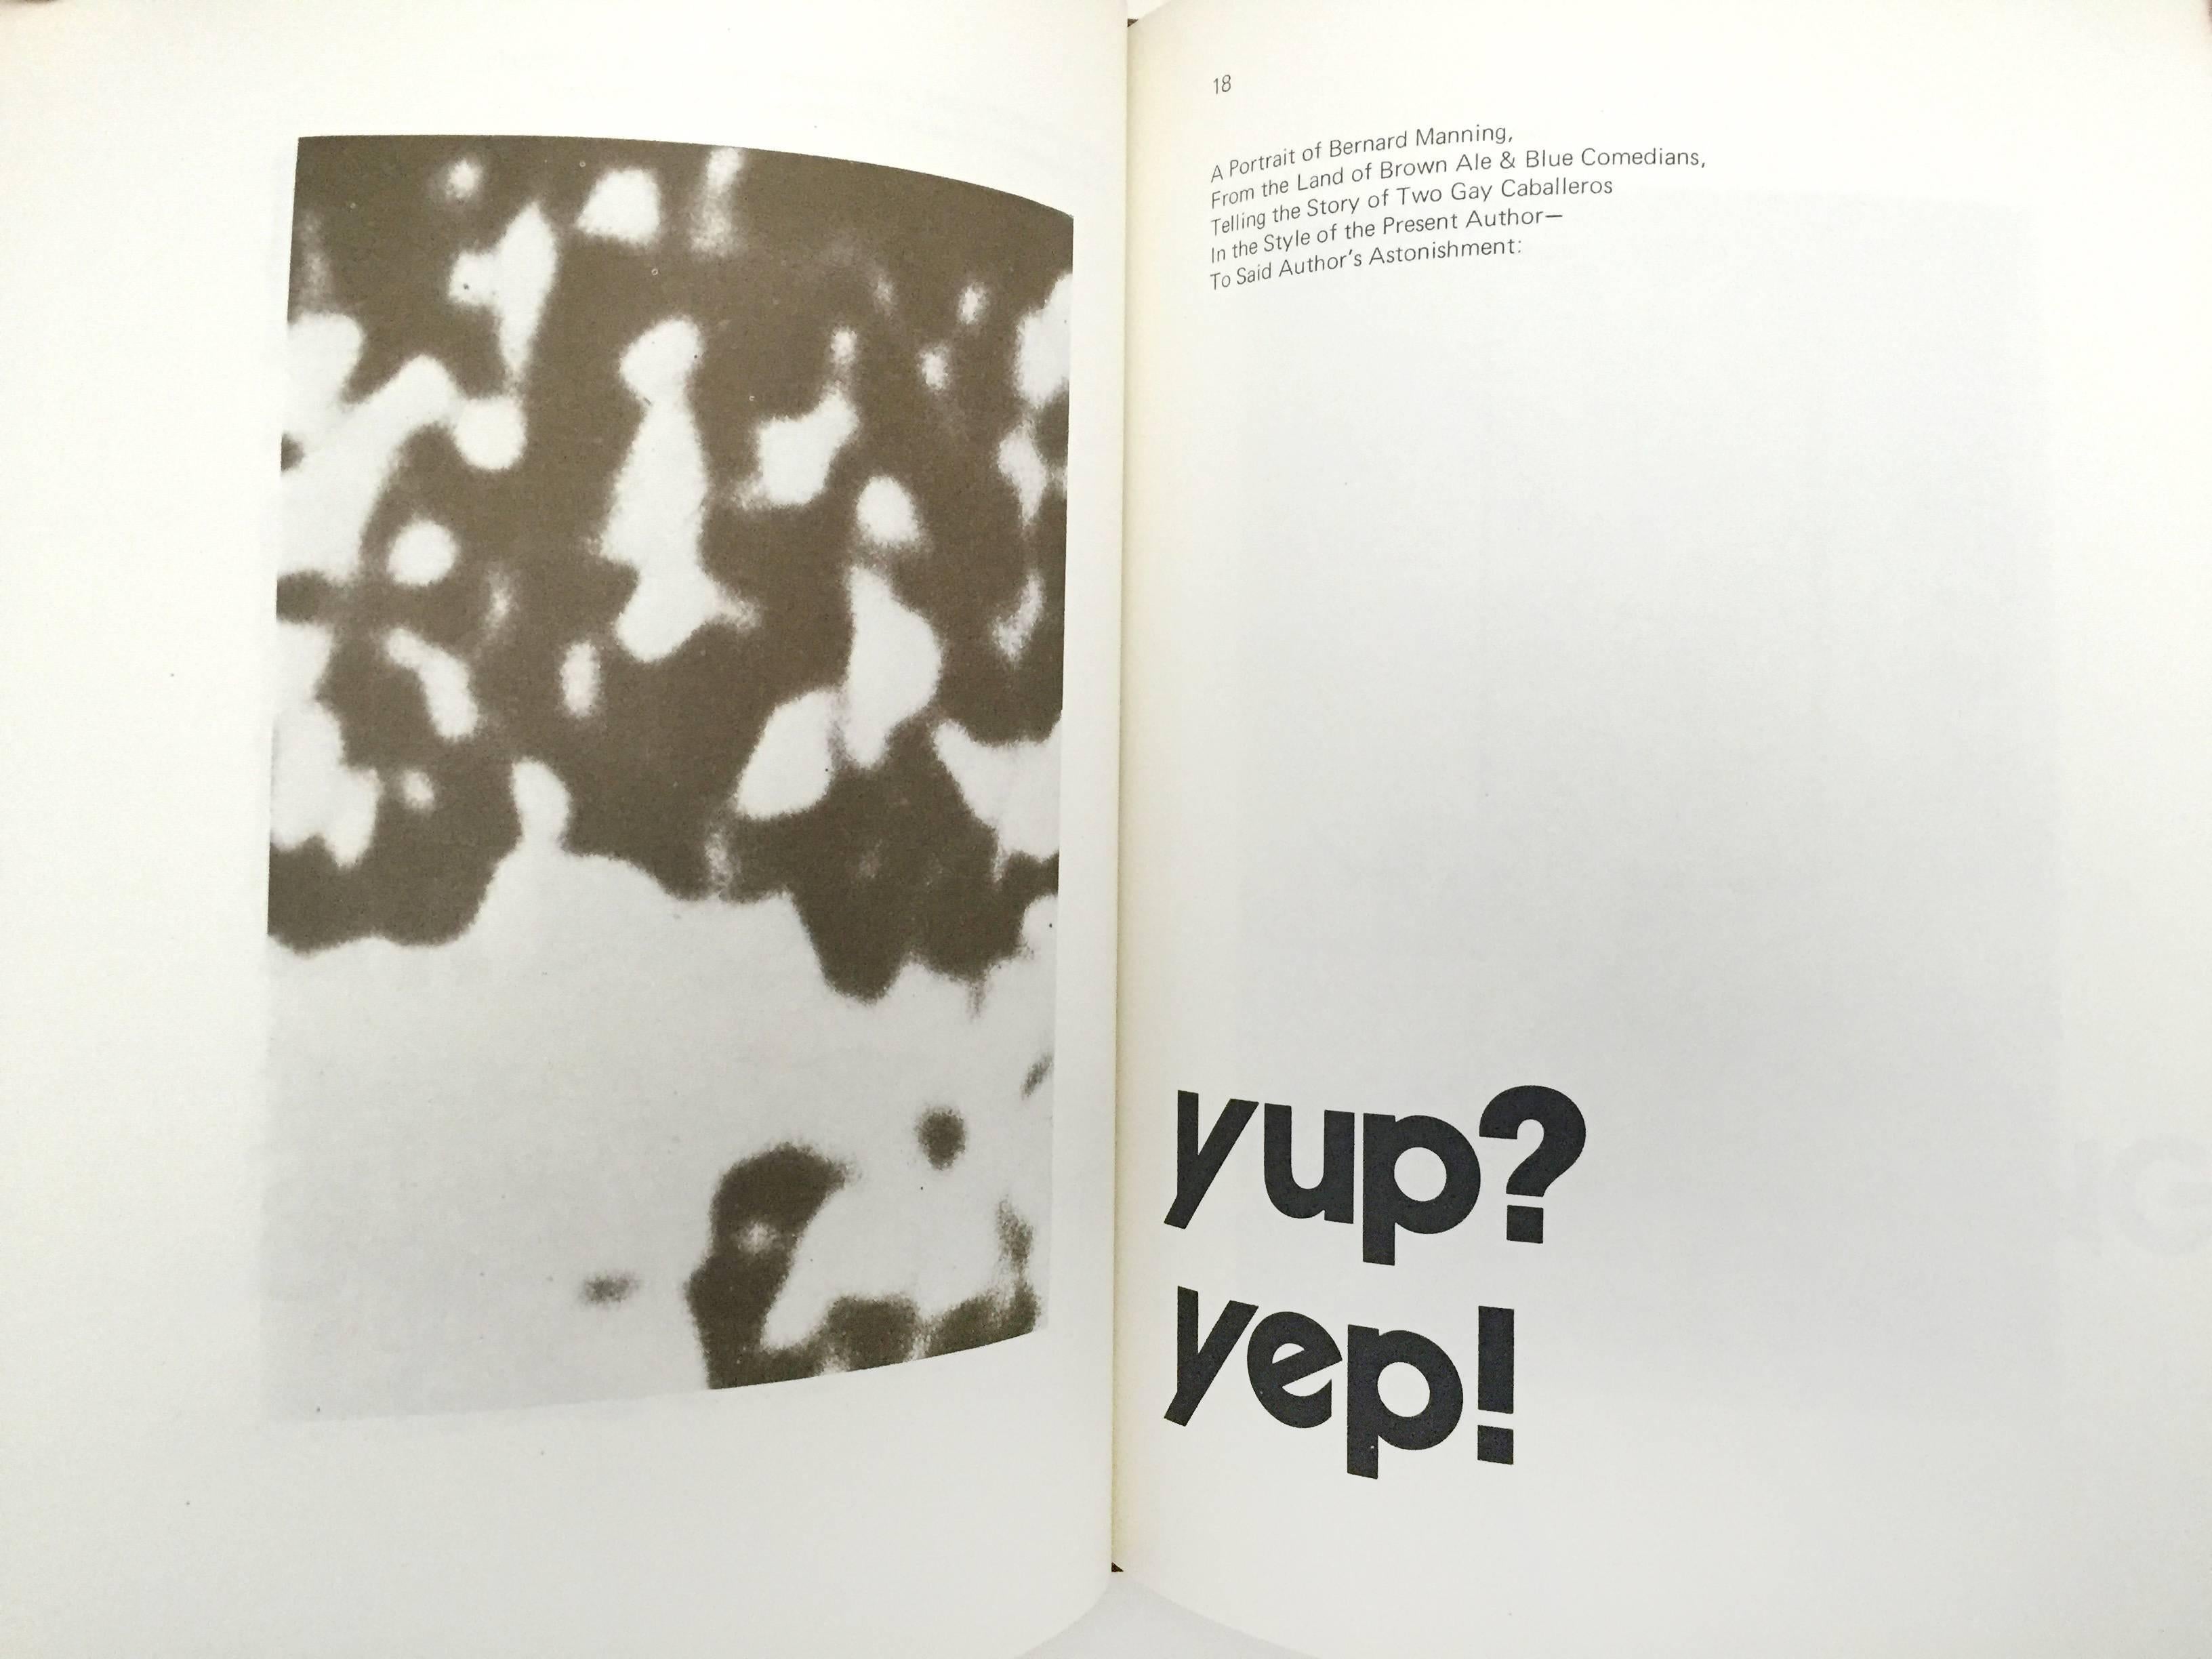 First Edition, published by Trigram Press, London, 1975. 

A collaborative book of disorientating and ethereal poetry and artworks by Jonathan Williams and Tom Phillips. Following a disagreement between the publishers and one of the authors